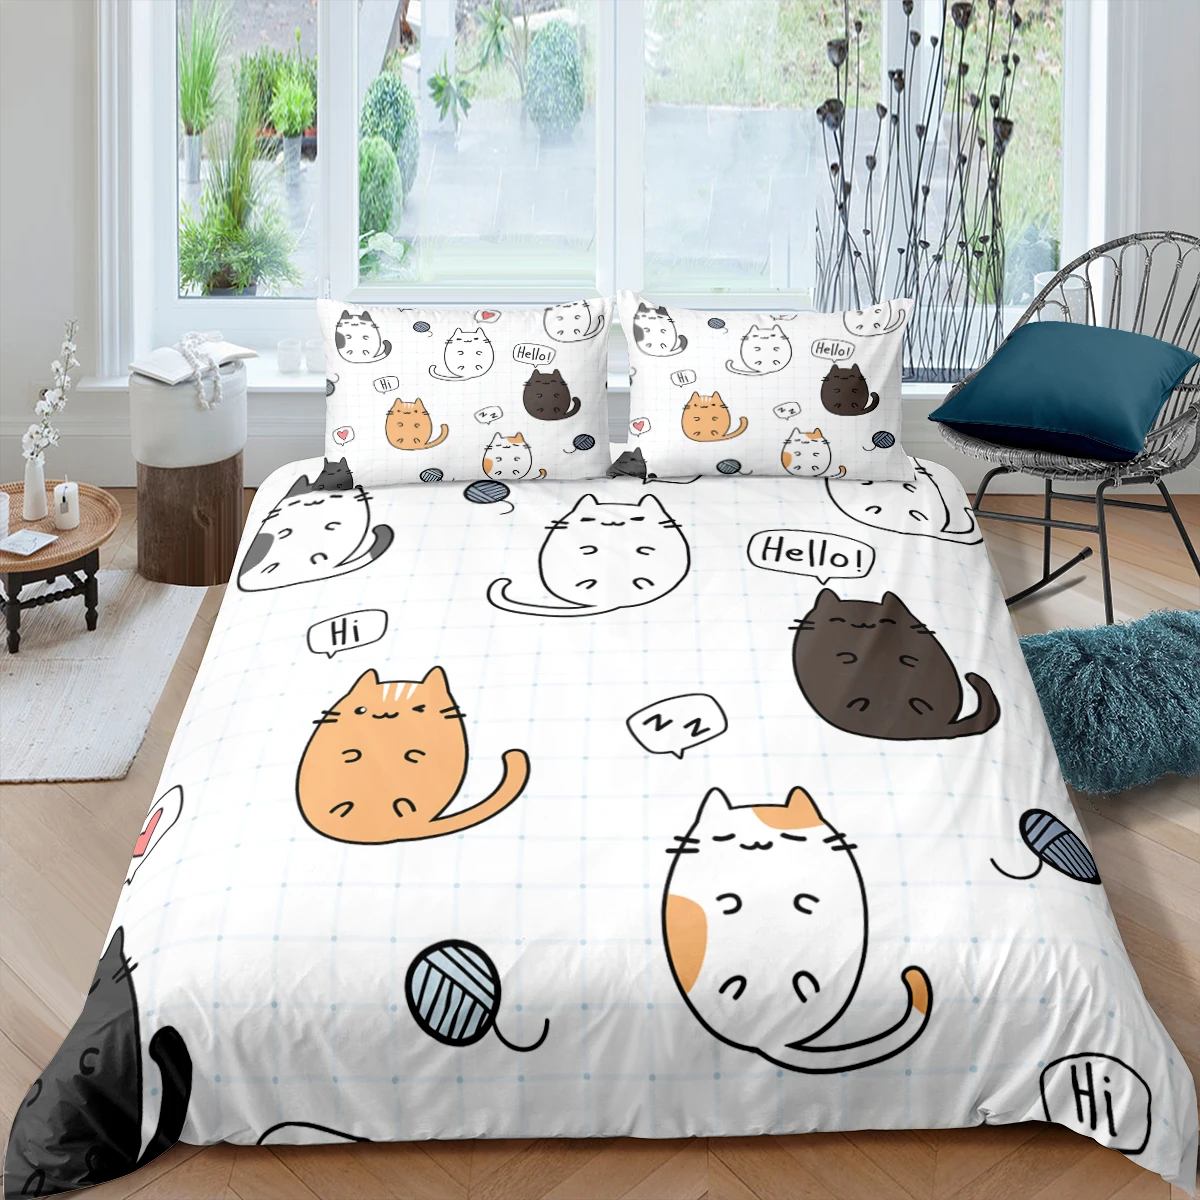 

Cute Pet Cats Bedding Set Cartoon Kitten Printed Duvet Cover Pillowcase Set For Girl Twin Full King Double Sizes Home Bedclothes